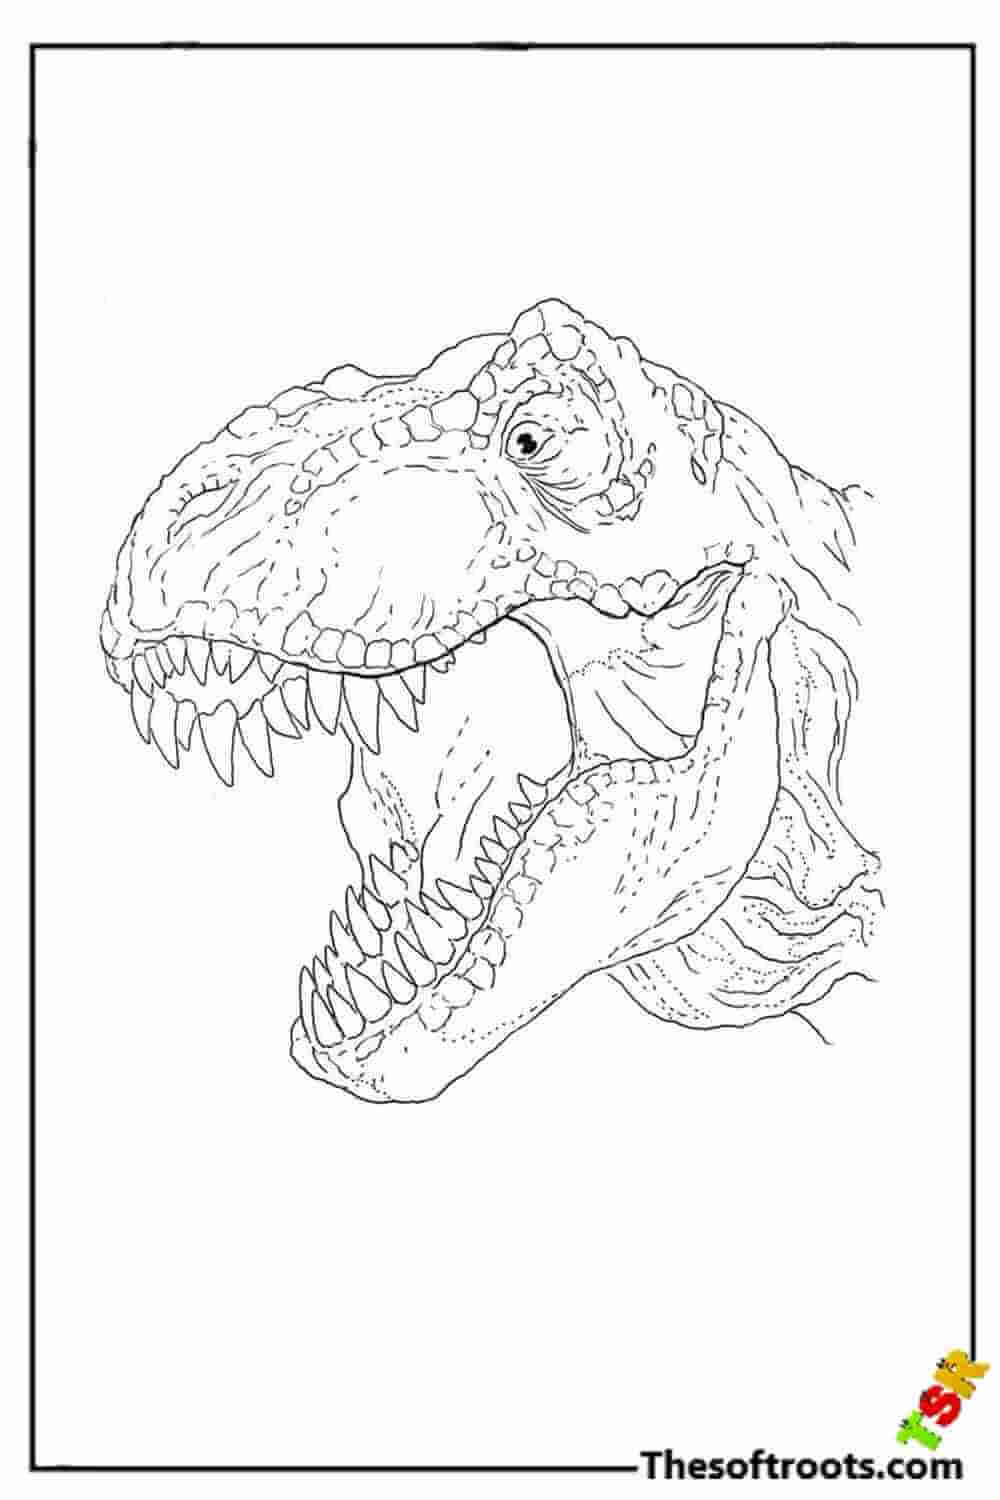 T-Rex Head coloring pages